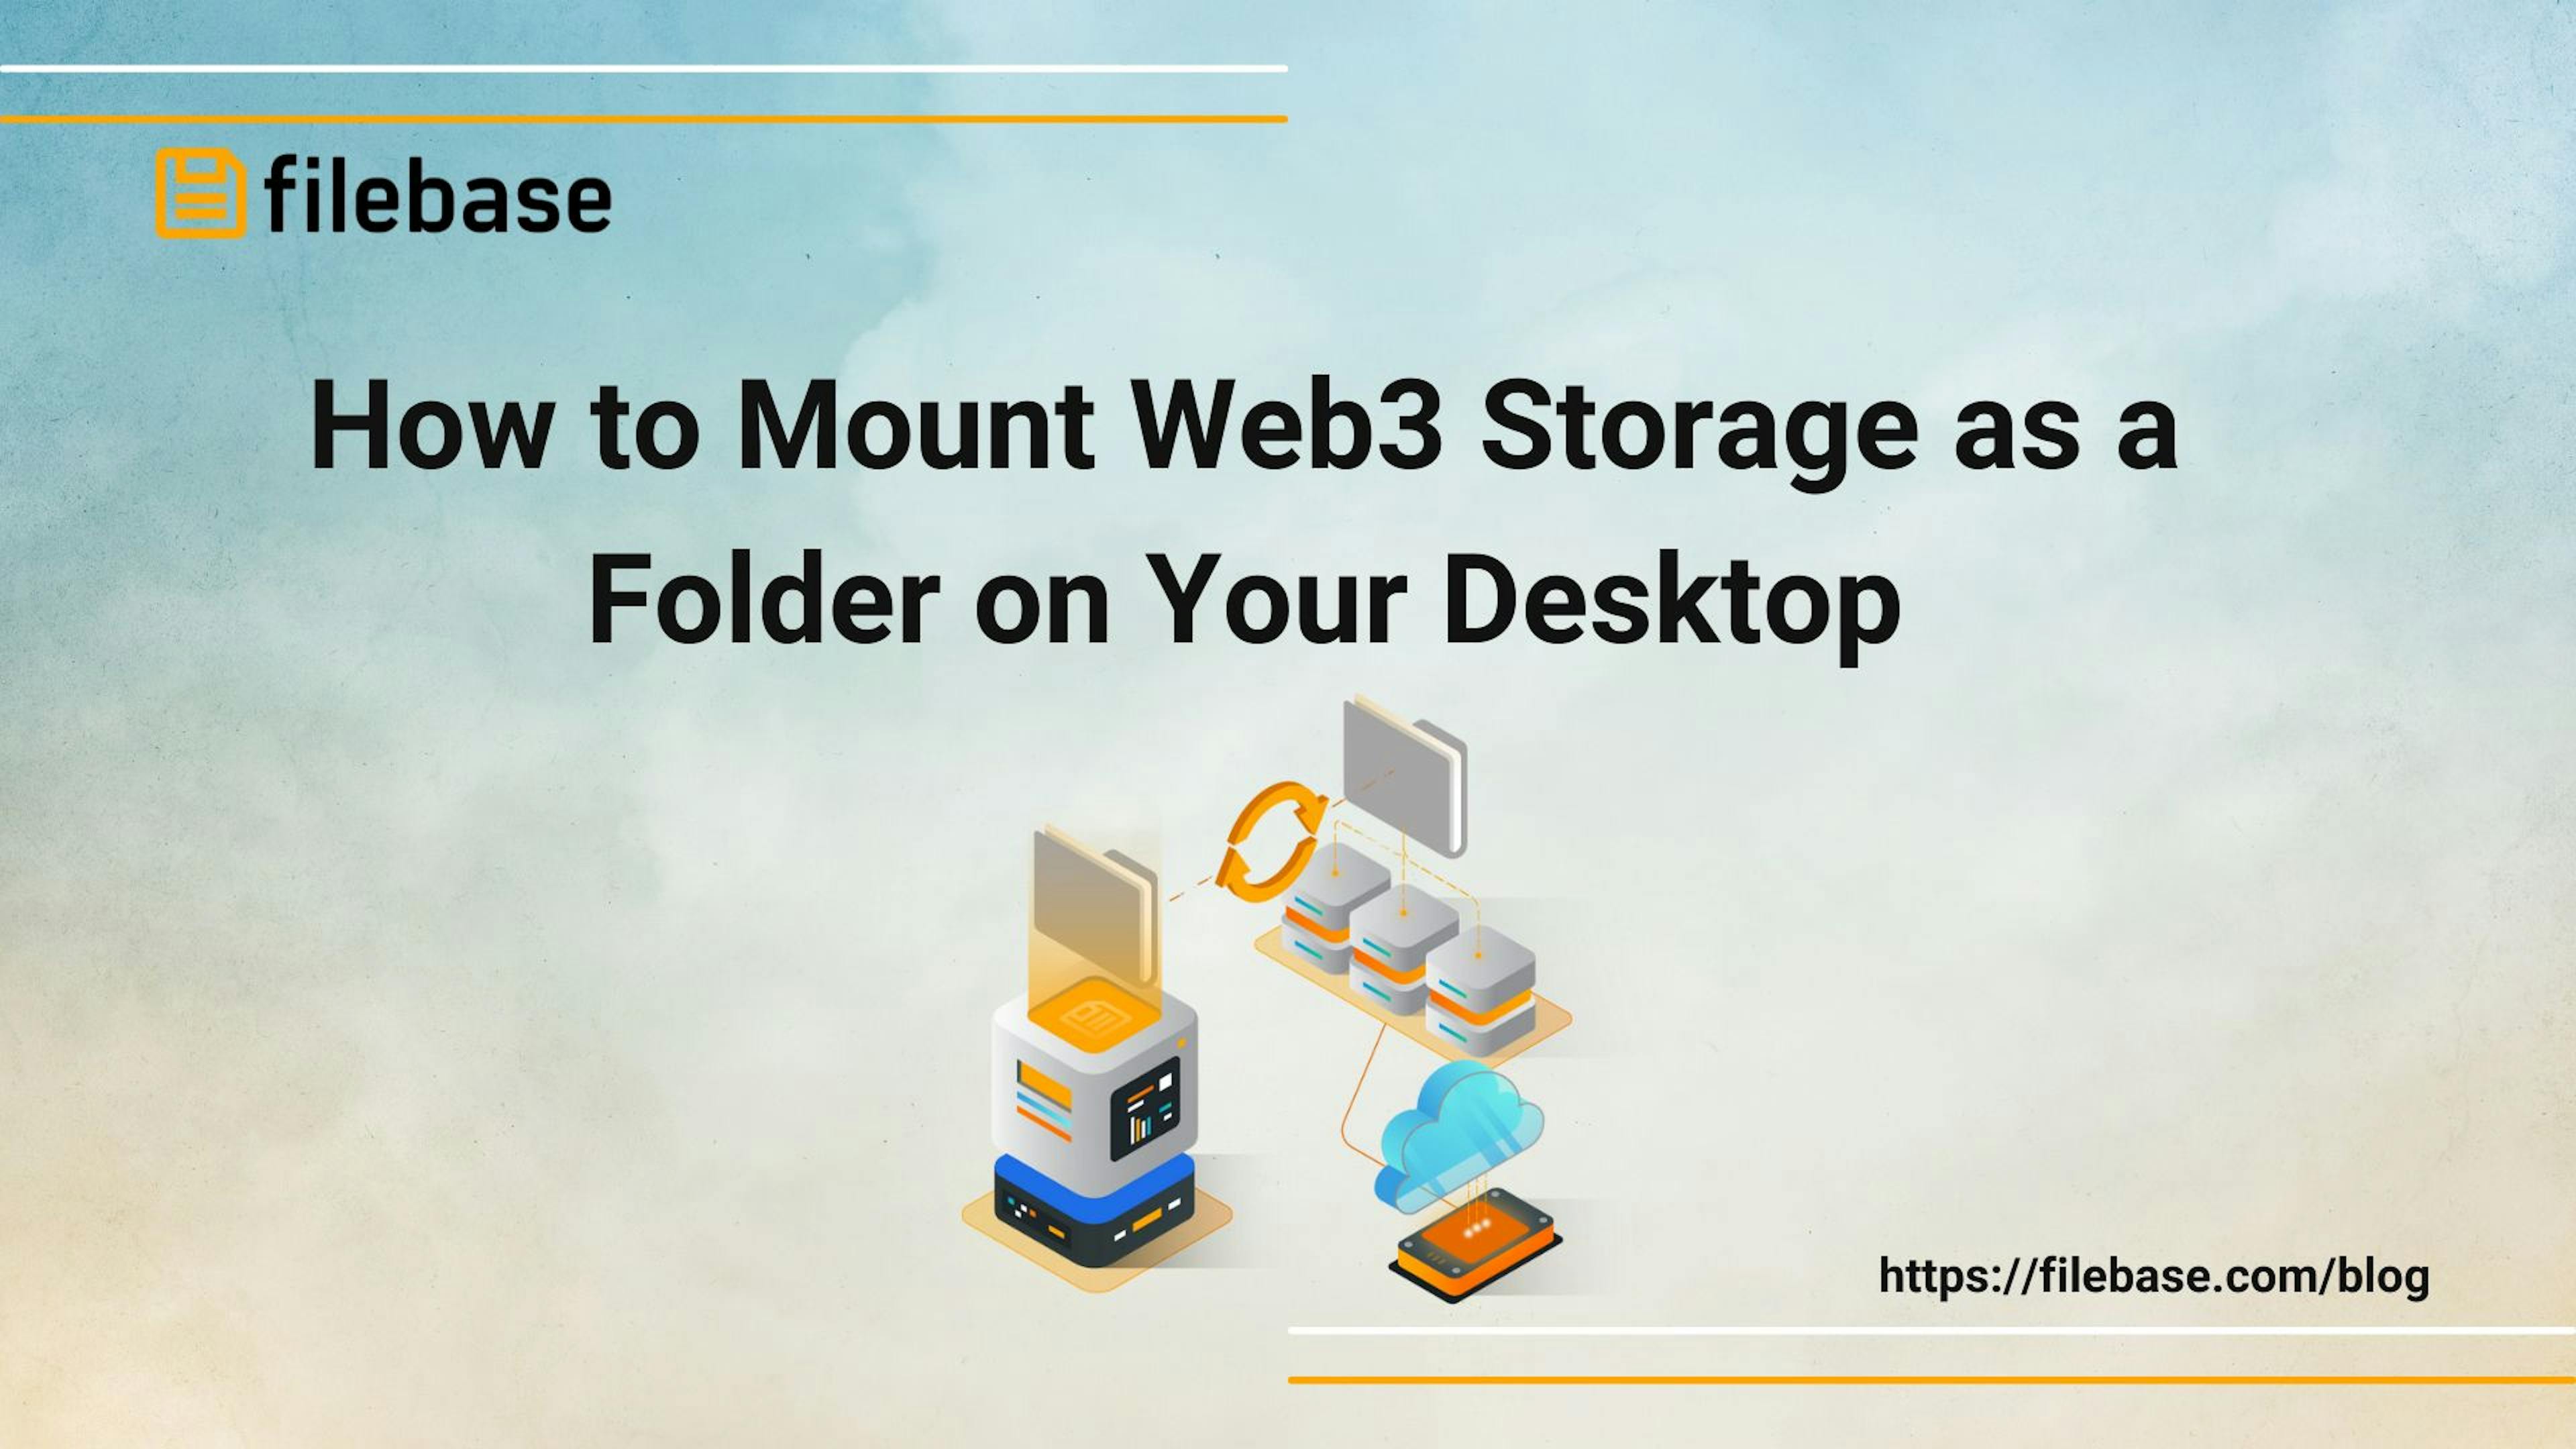 /how-to-mount-web3-storage-as-a-folder-on-your-desktop feature image